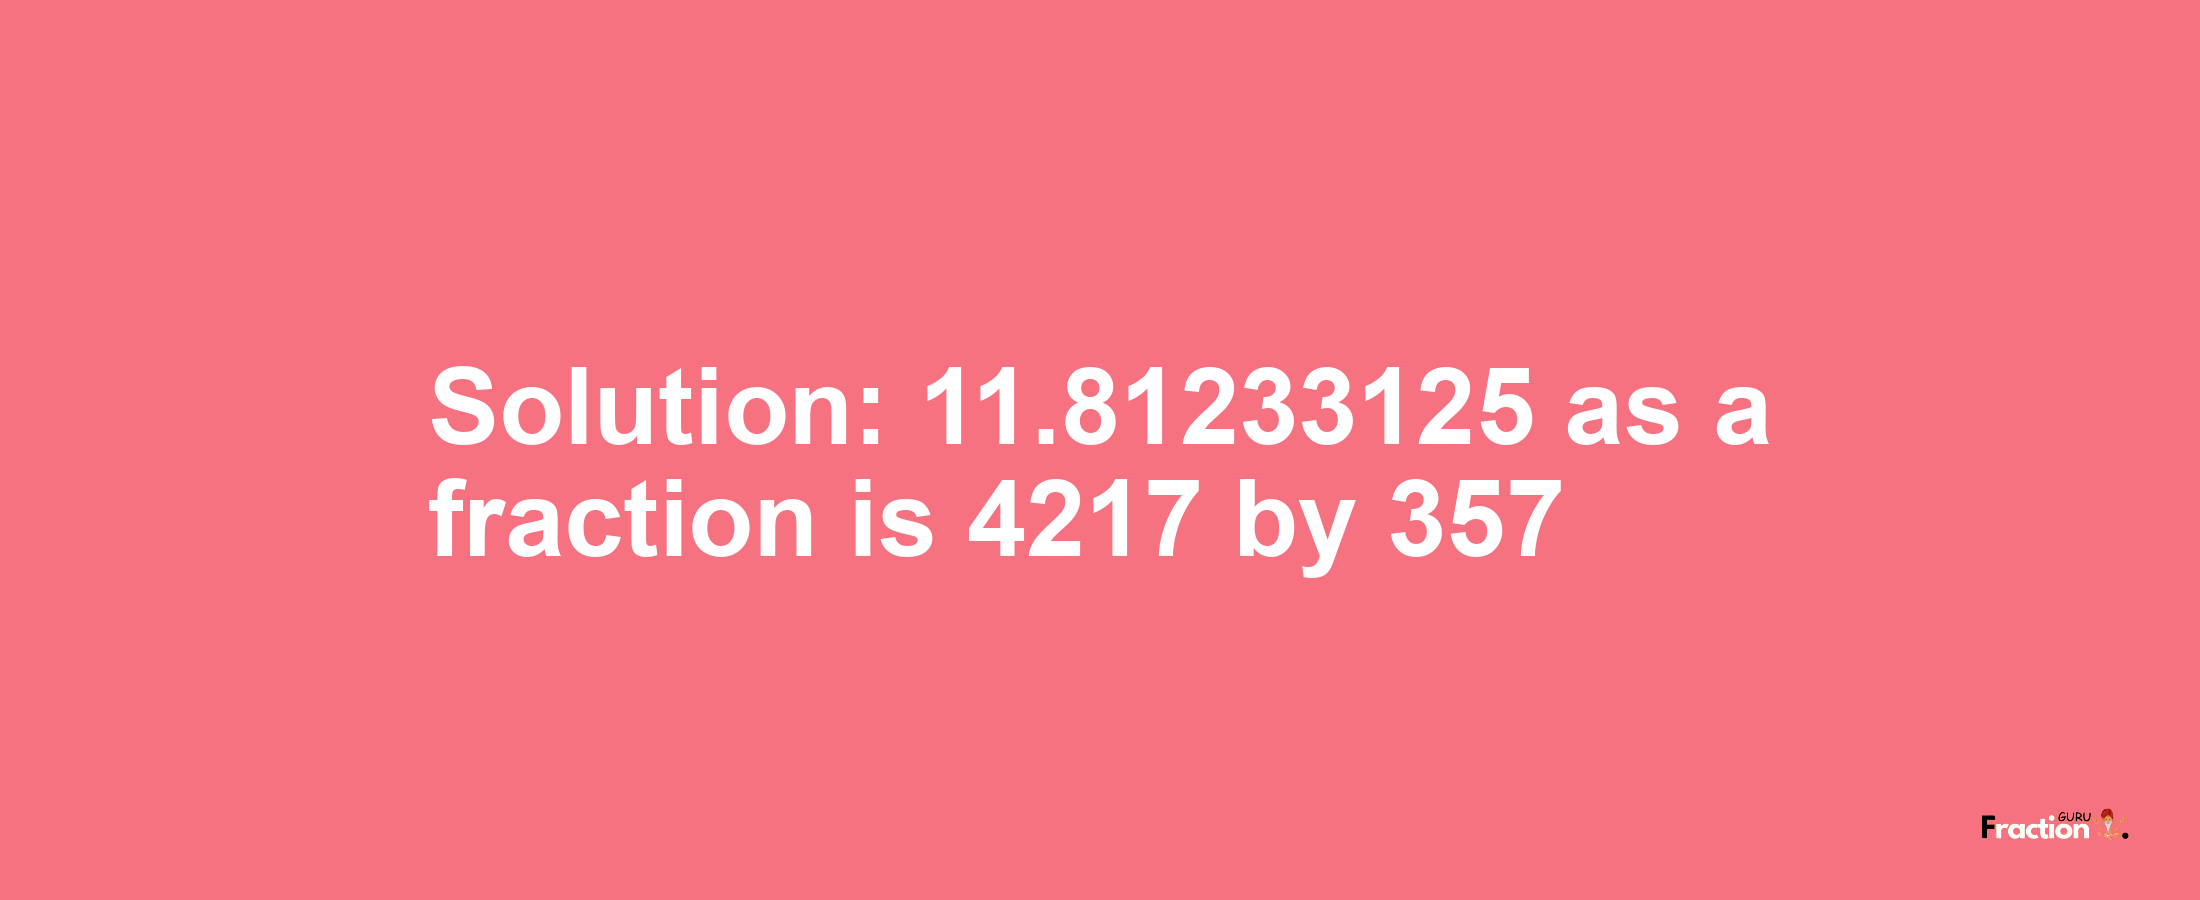 Solution:11.81233125 as a fraction is 4217/357